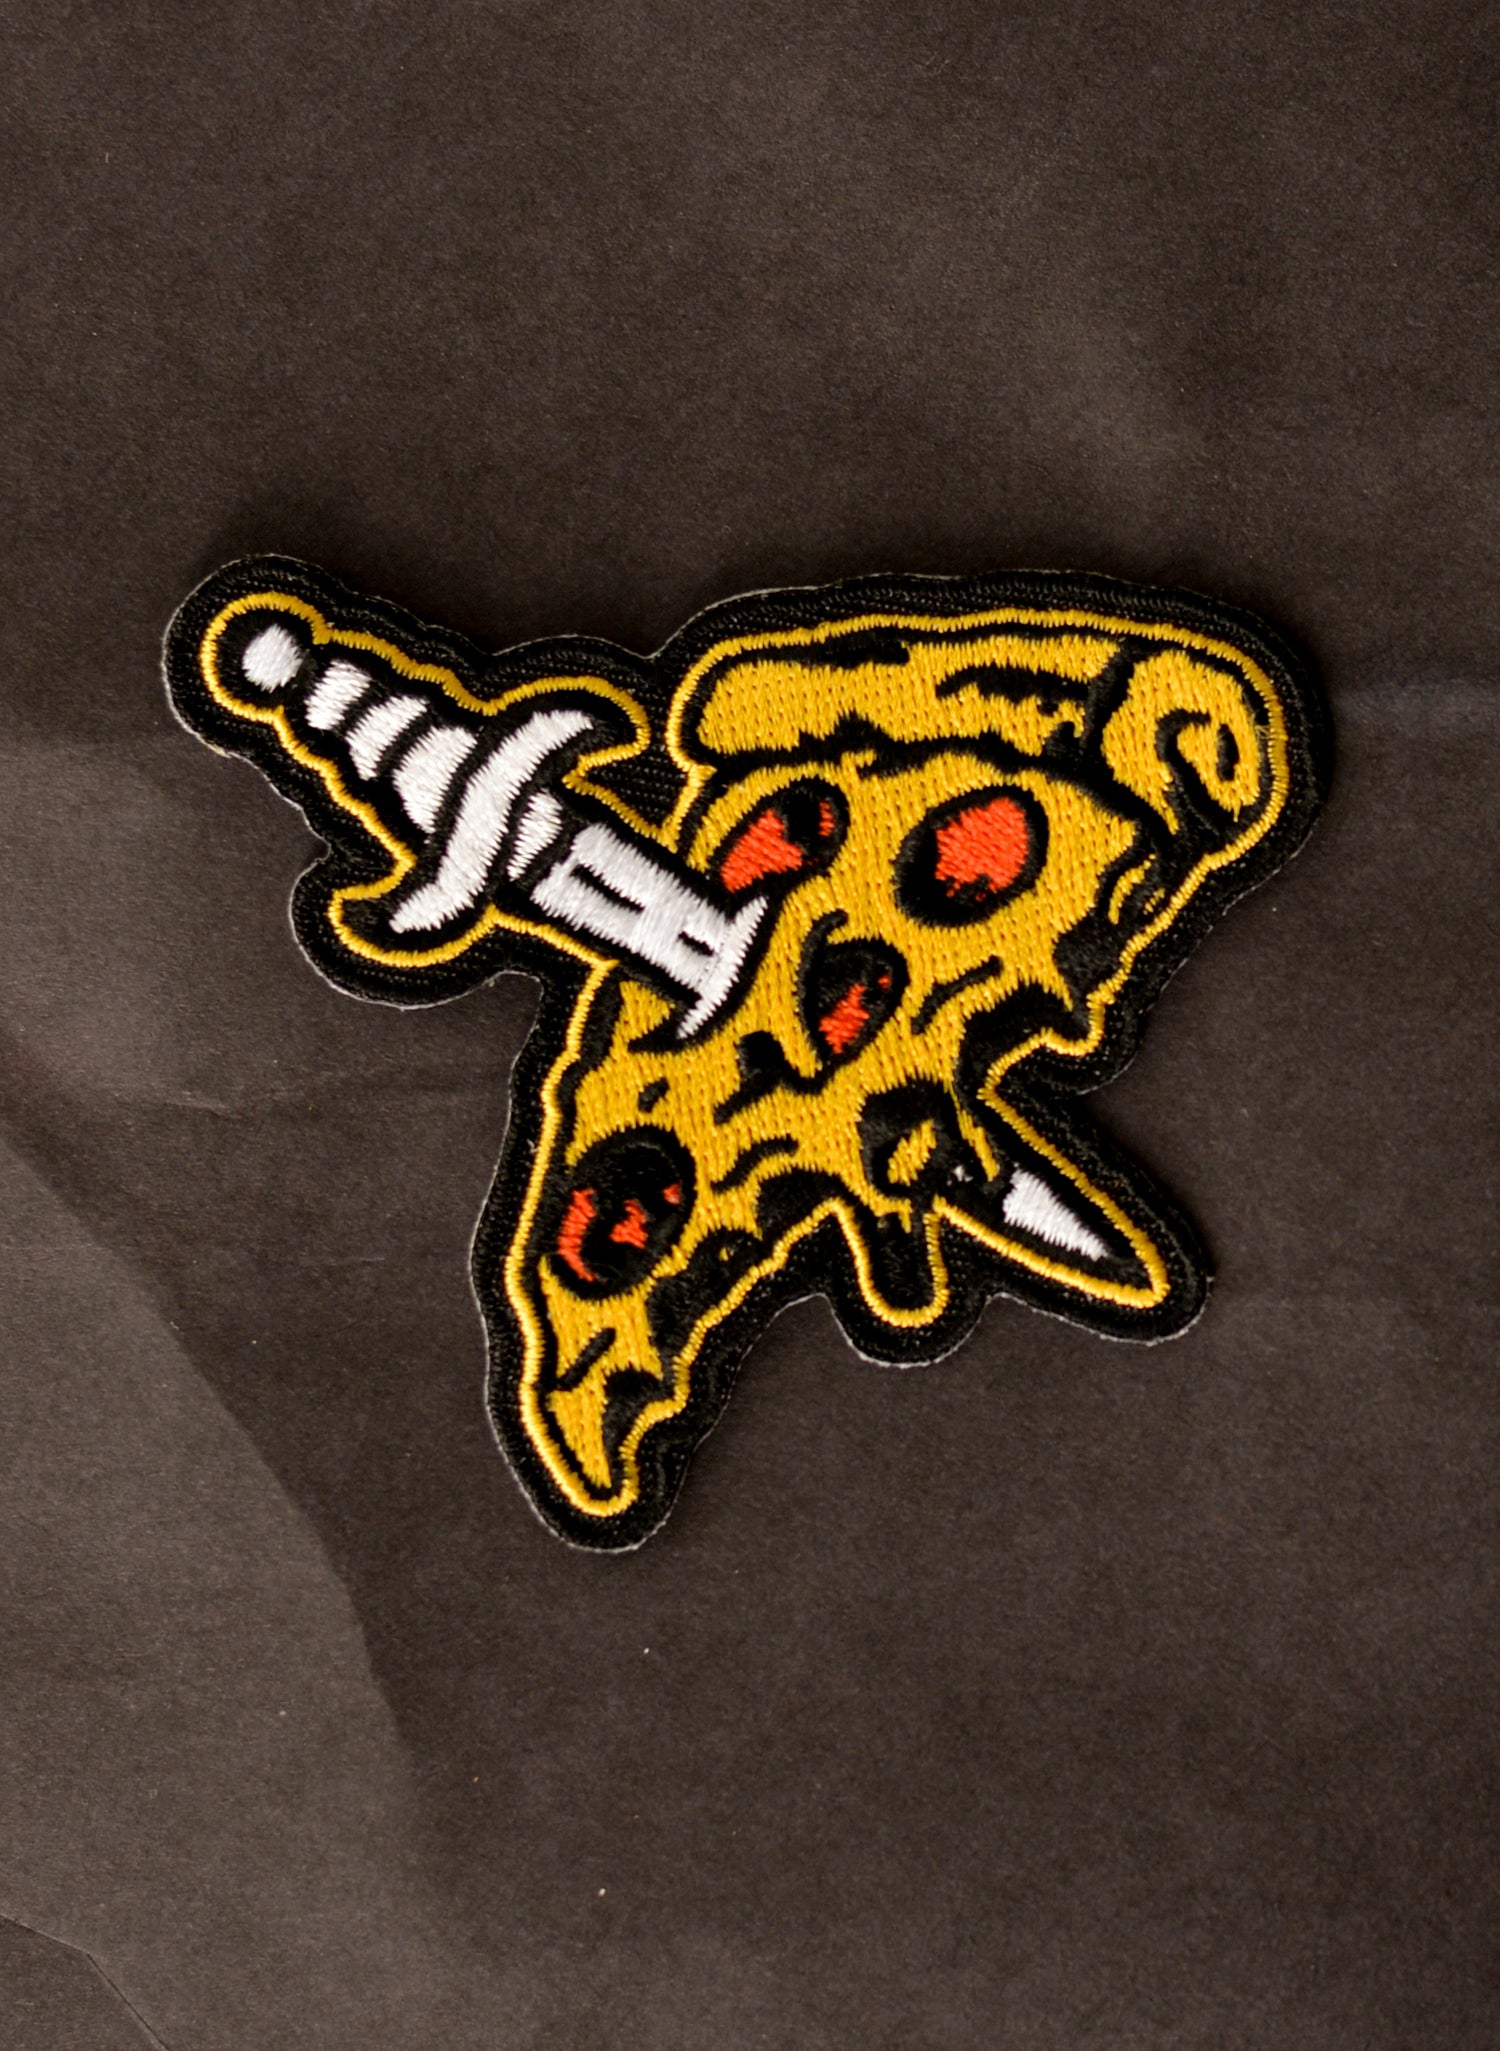 Live By the Slice Die By the Slice Embroidered Pizza Tattoo Iron-On Patch for Foodies